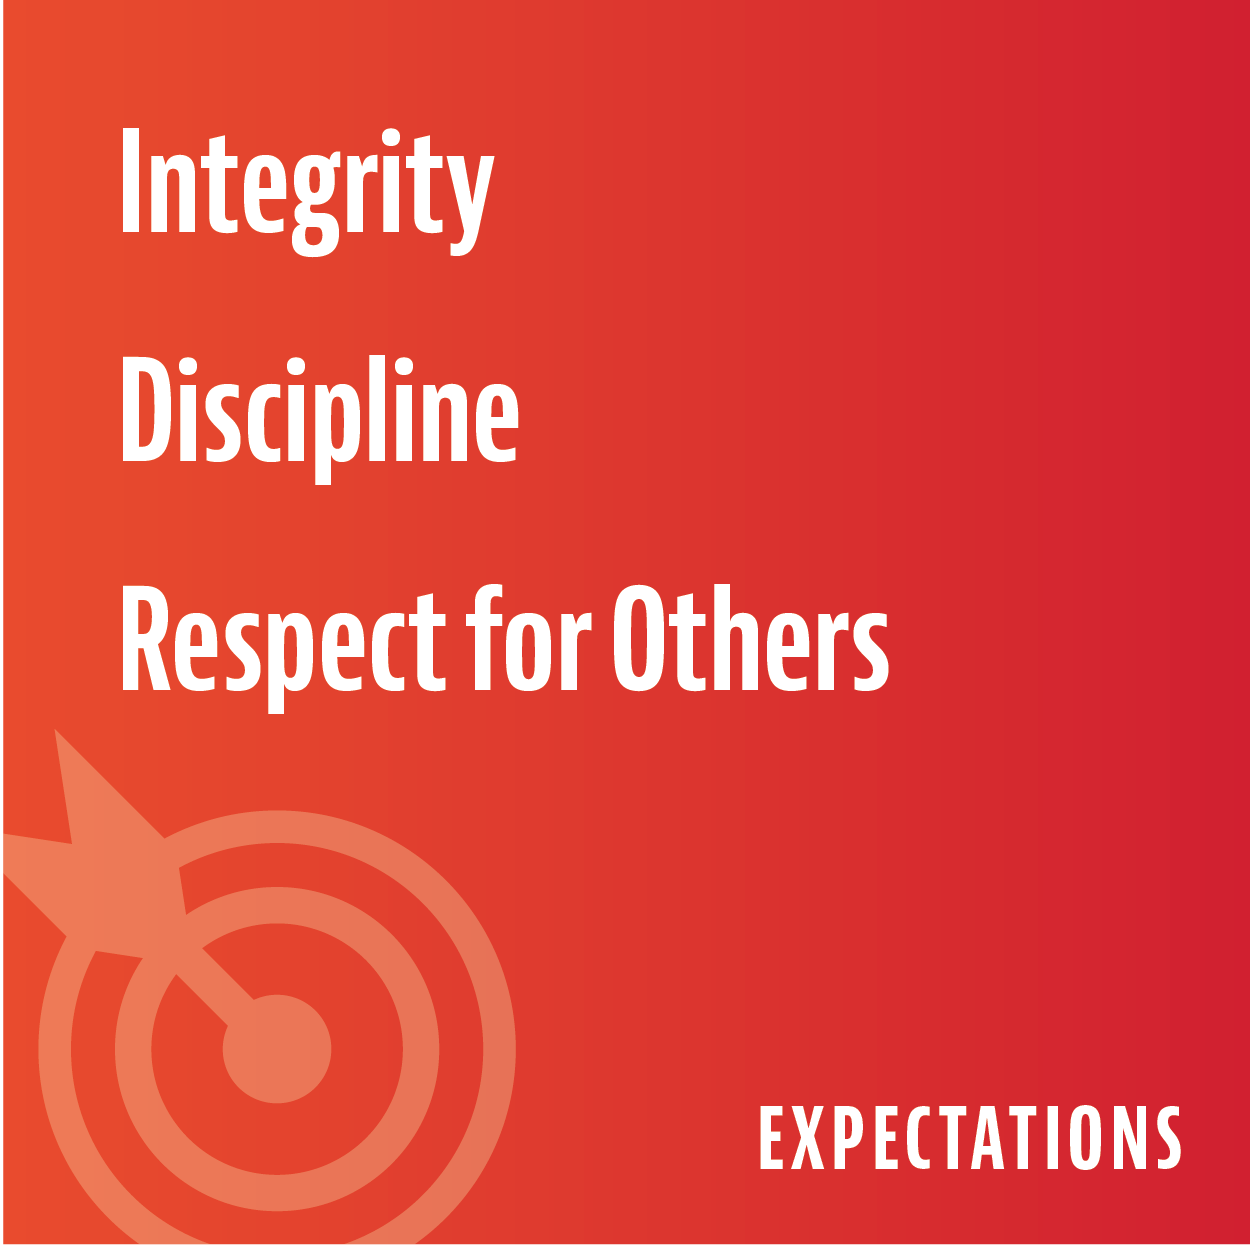 Integrity, Discipline, Respect for Others